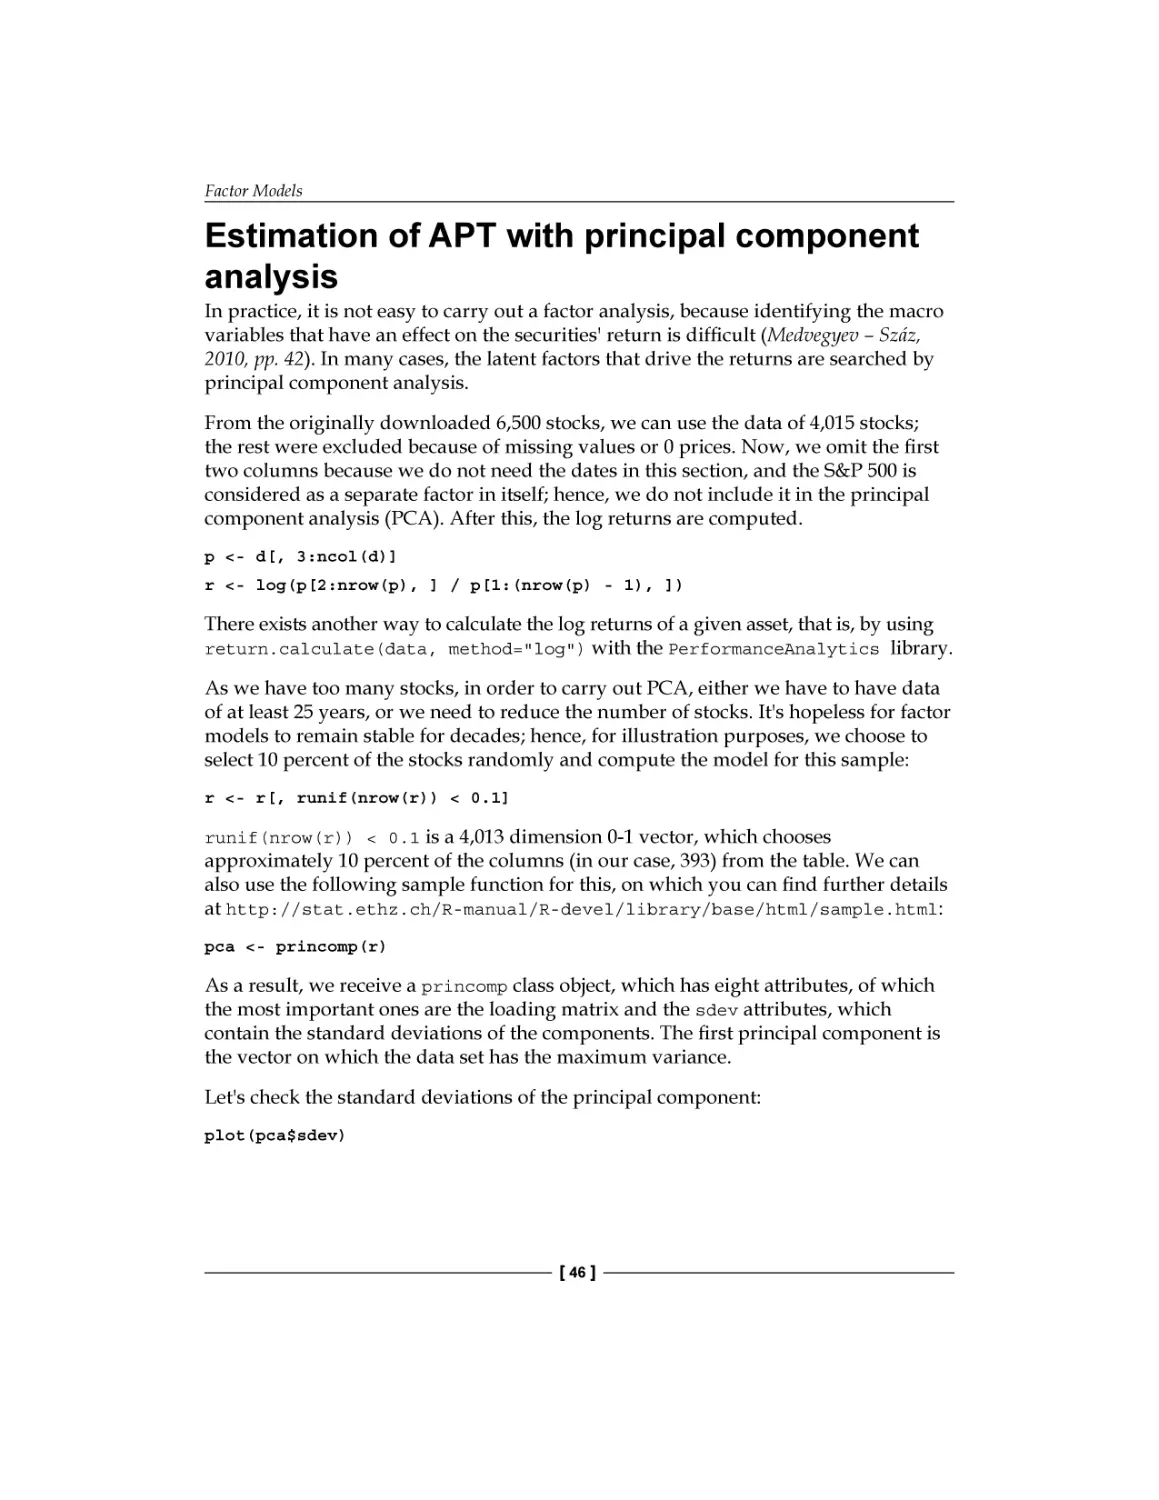 Estimation of APT with principal component analysis